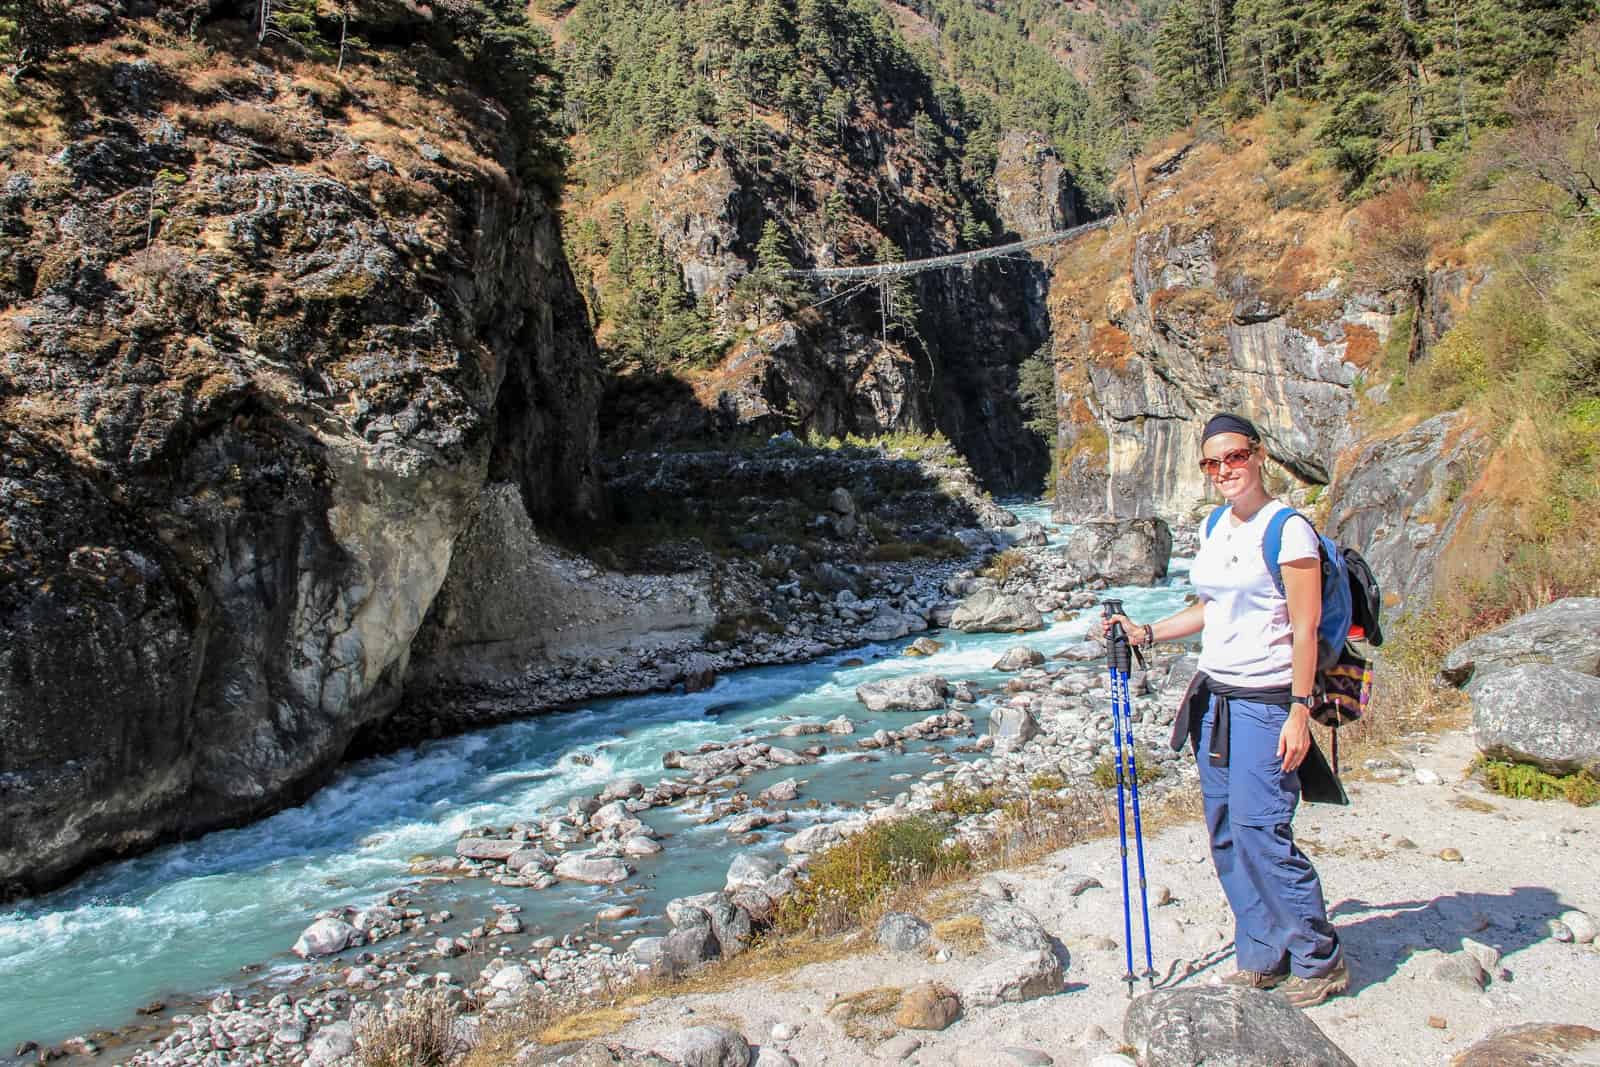 A woman in t-shirt and trekking pants holds a walking pole while standing next to a bright turquoise river in a small rocky canyon in the Nepalese Himalayas